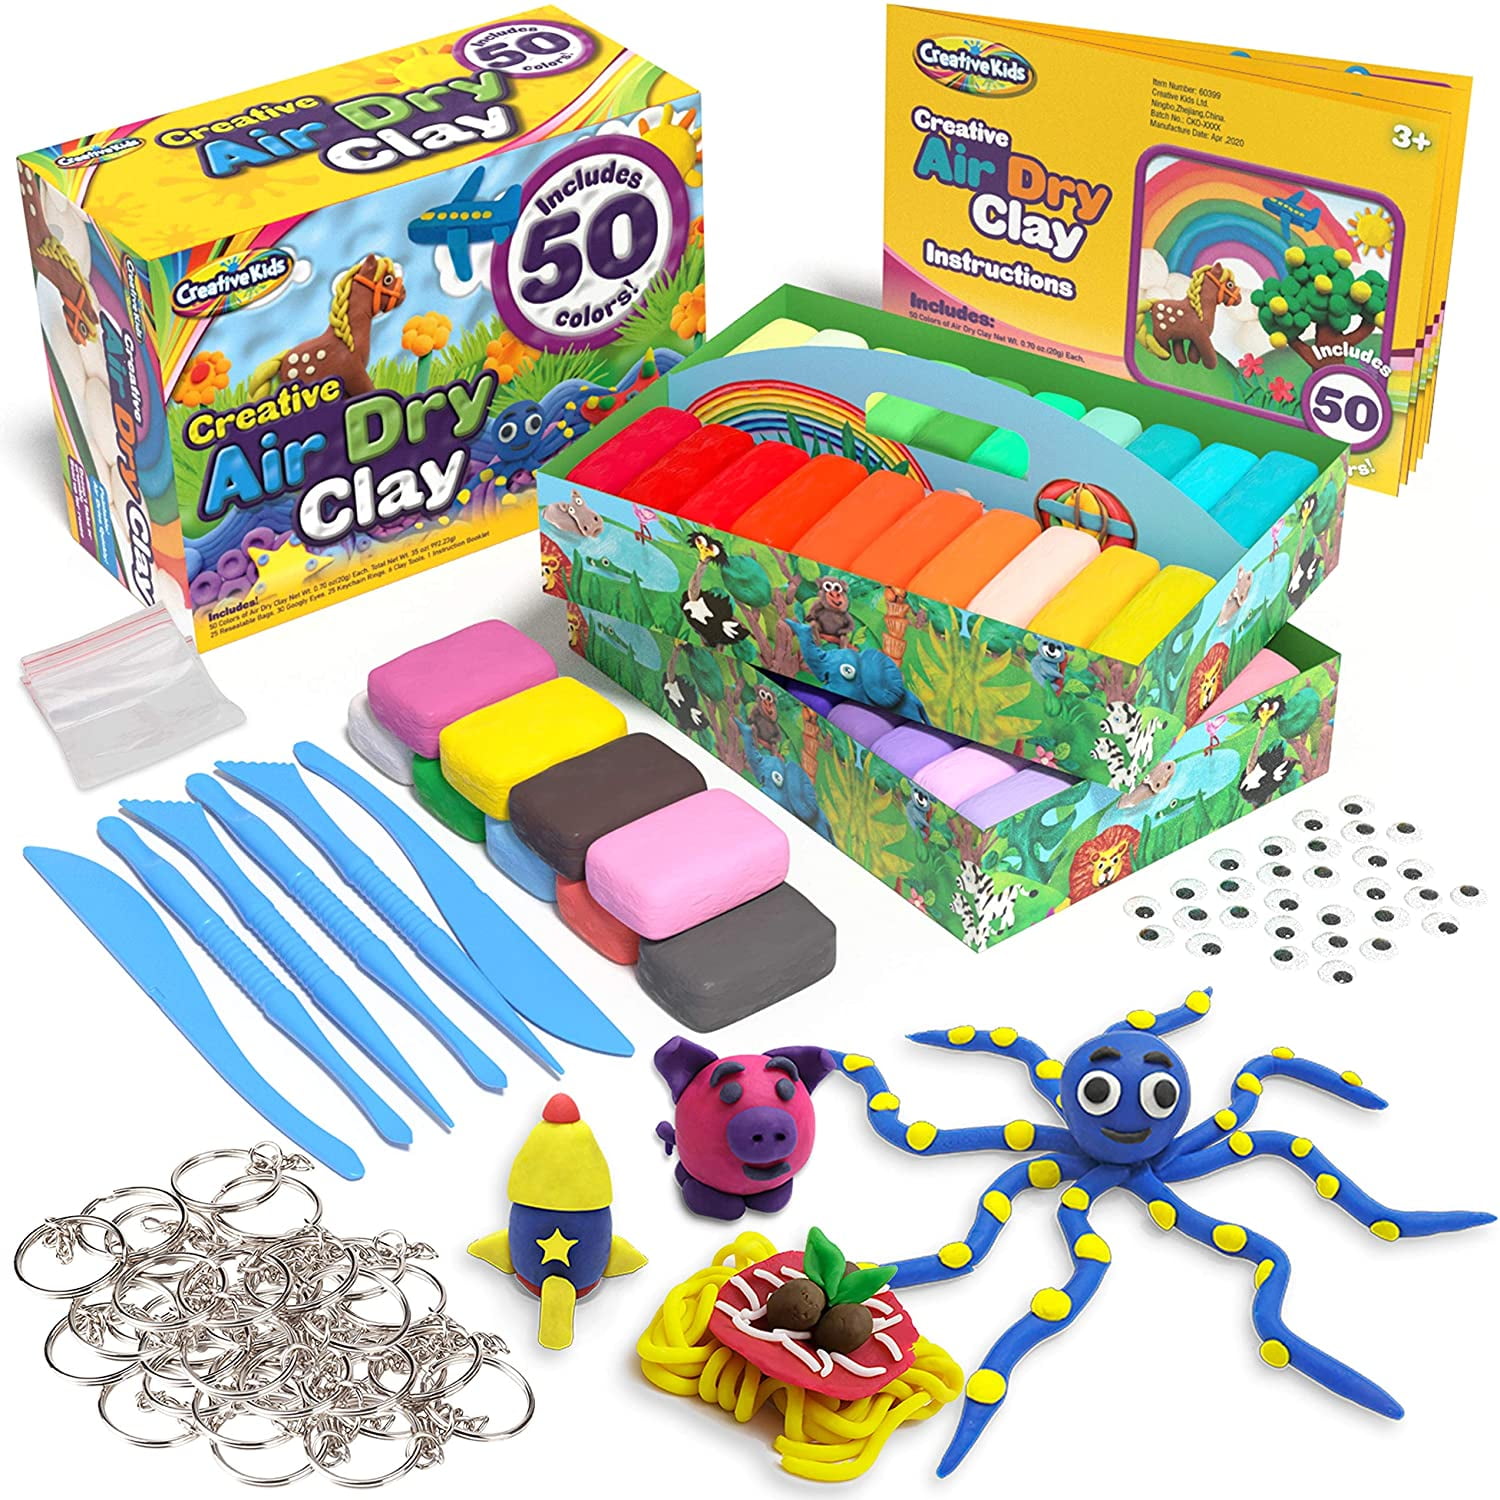 Kids Modelling Clay Set Plasticine 15 Pack Non Toxic Play Craft & Create 3+Years 